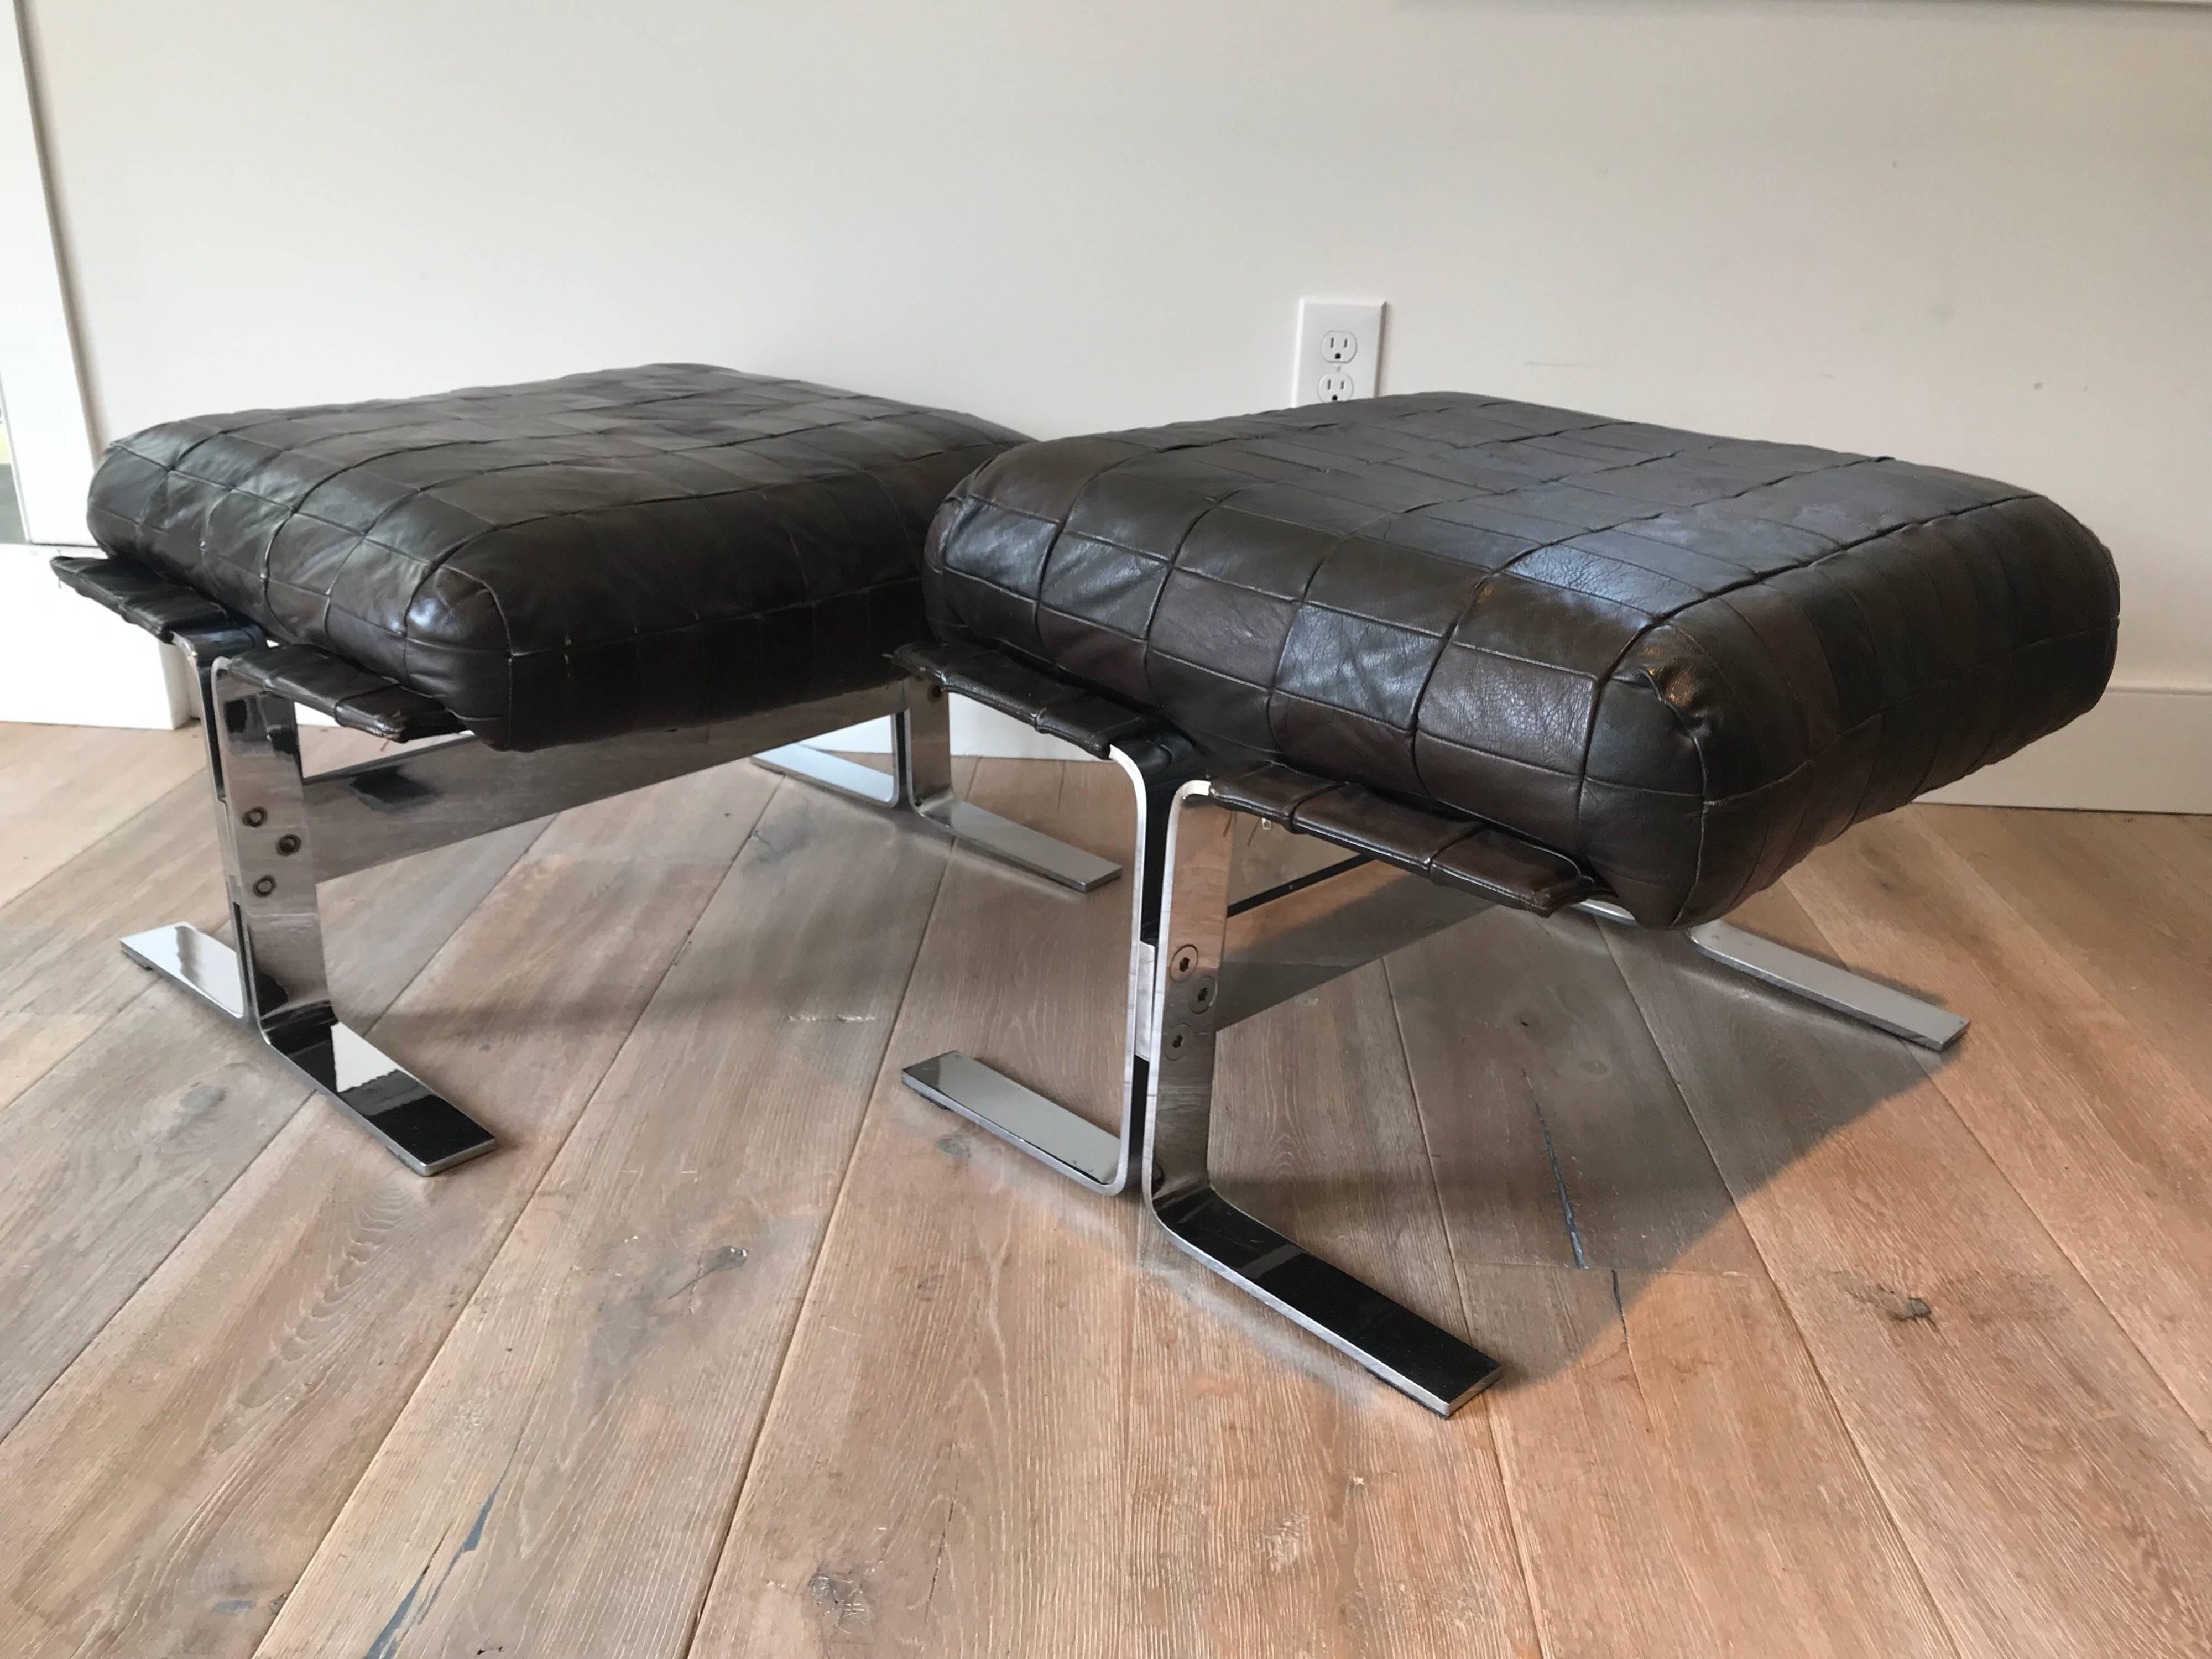 Pair of chrome frame ottomans with brown patchwork leather cushion. Designed by Kipp Stewart for Pace.